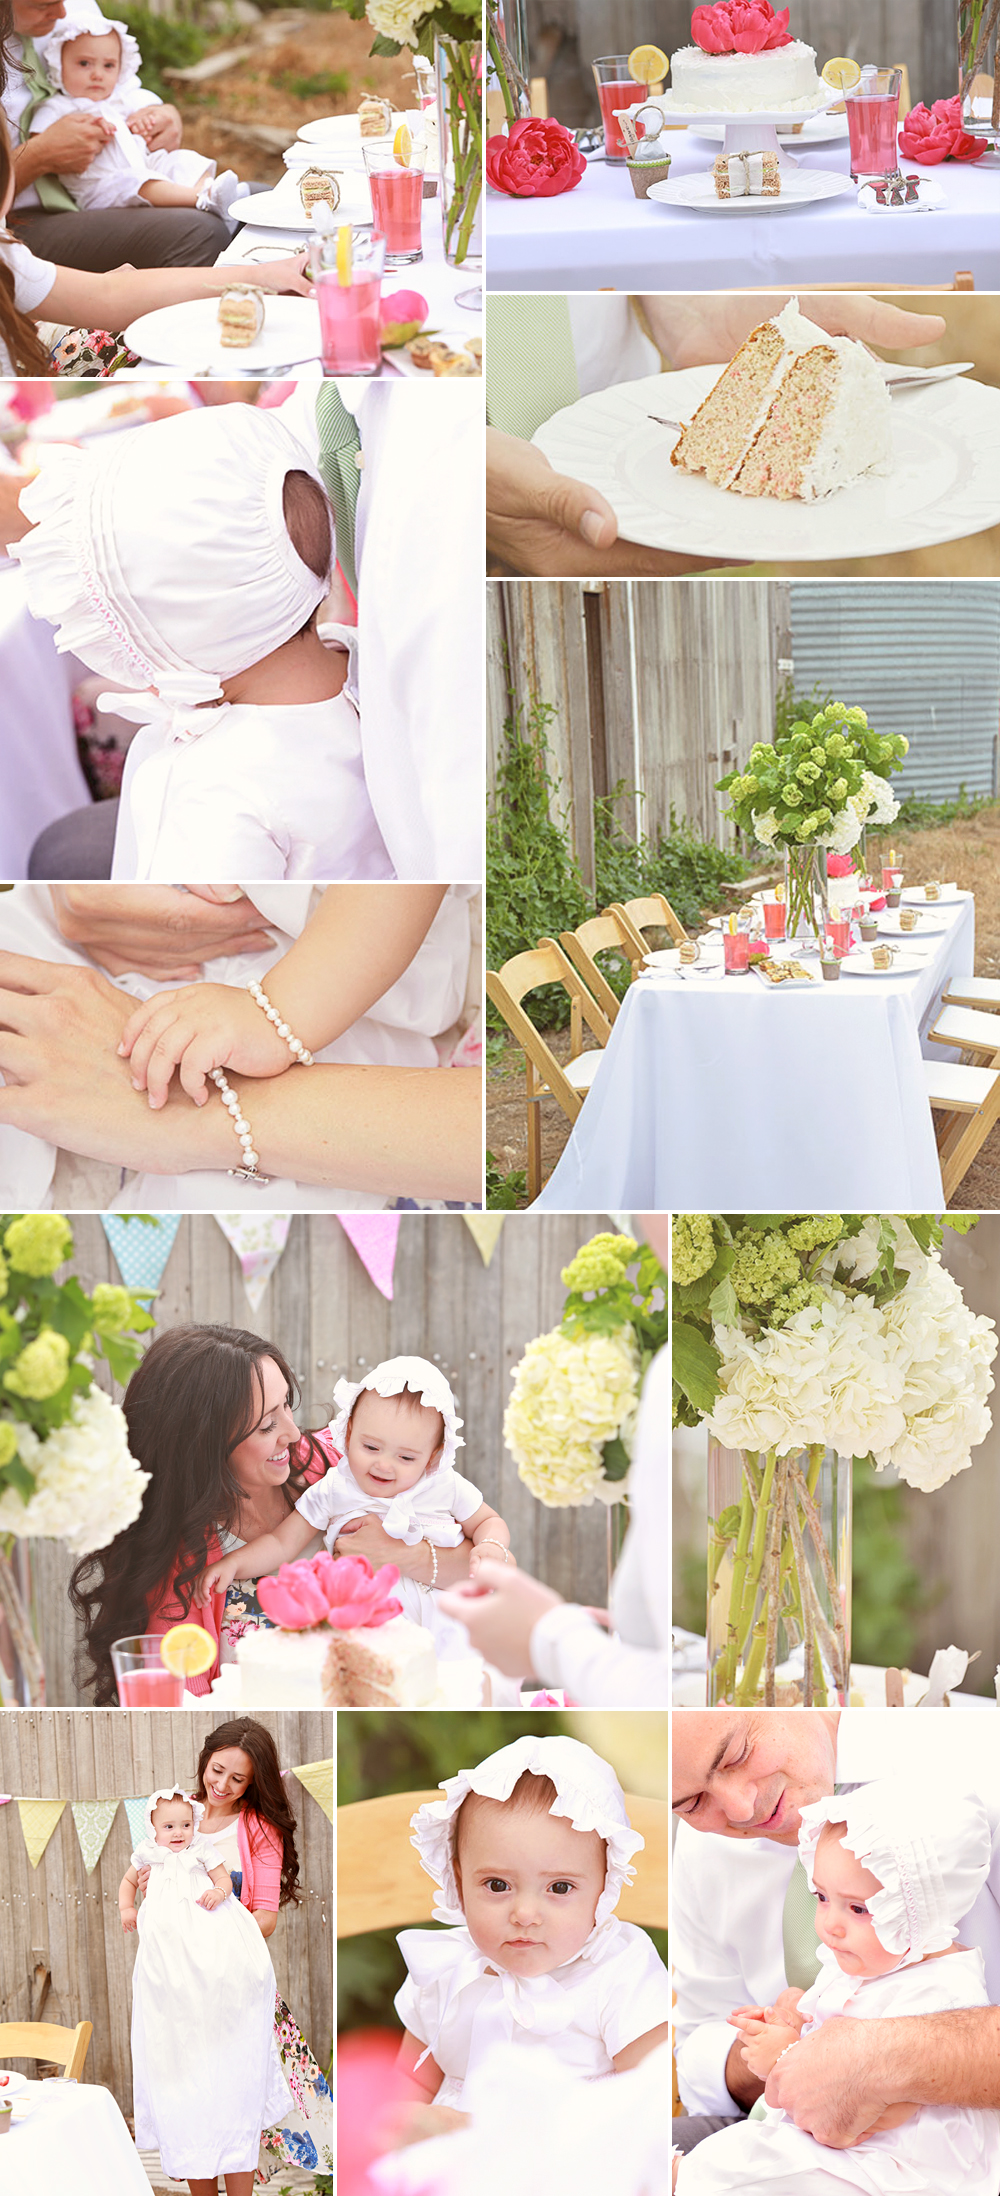 A Summer Christening Party - One Small Child